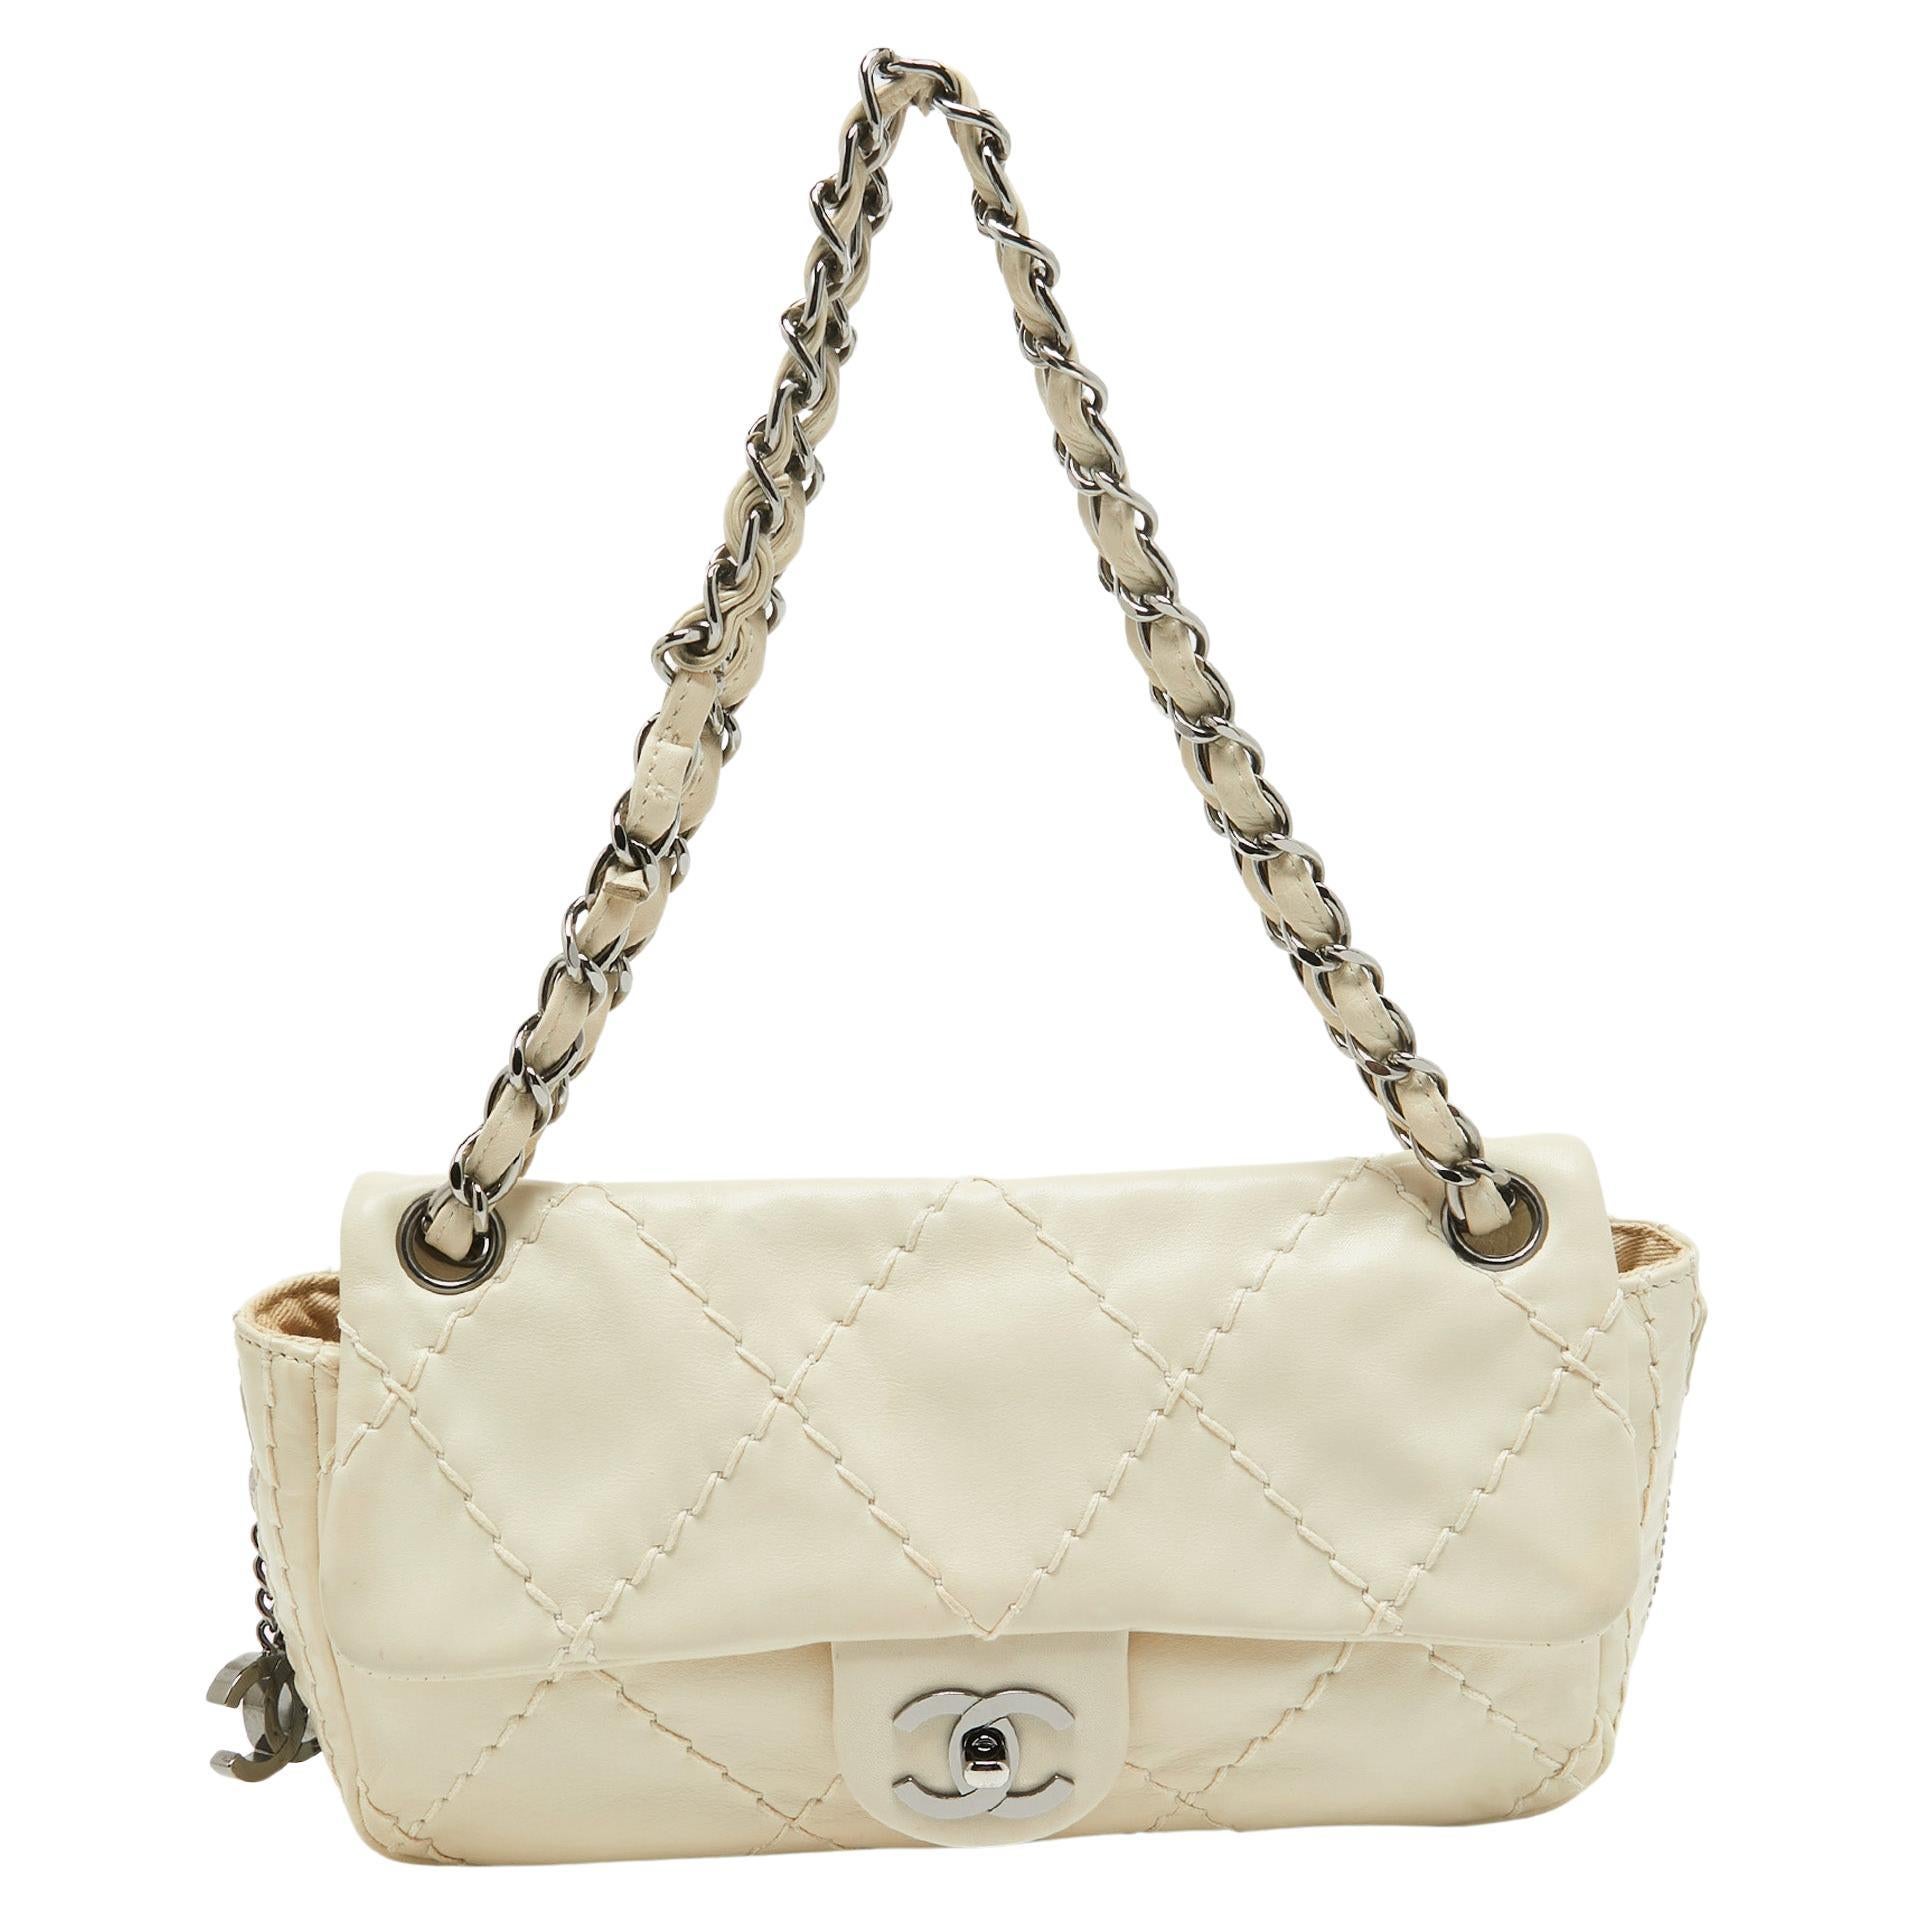 Chanel Off White Quilted Wild Stitched Leather Expandable Flap Bag